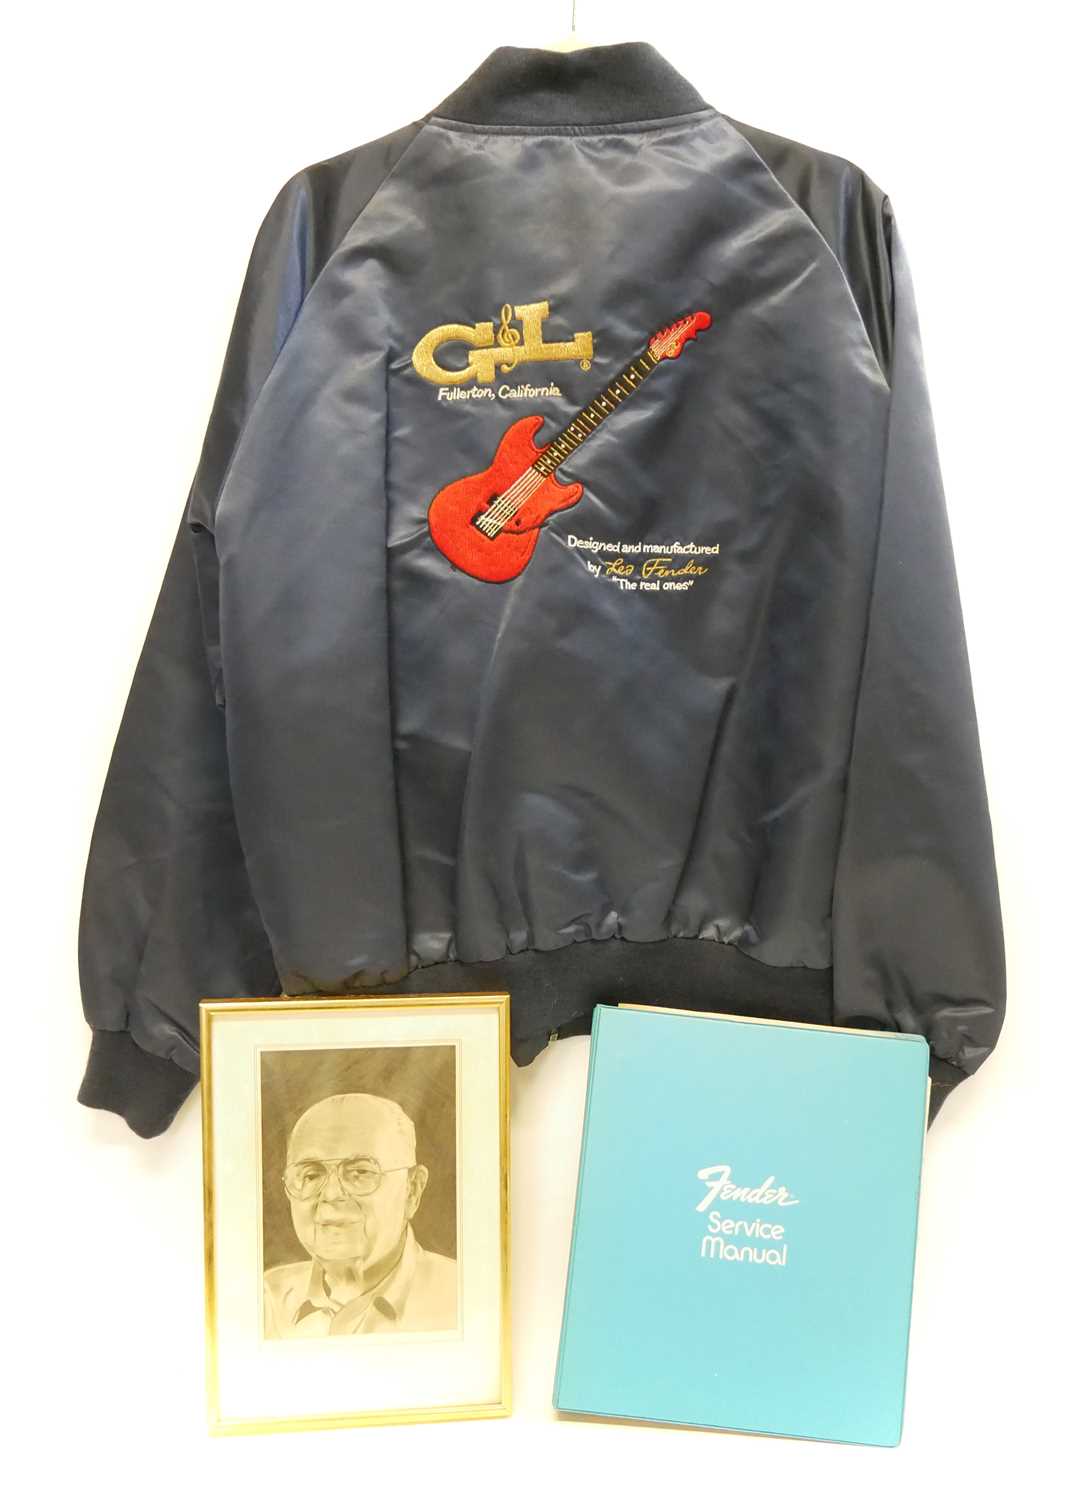 G&L Fender jacket, Fender Service manual and a pencil drawing of Leo Fender